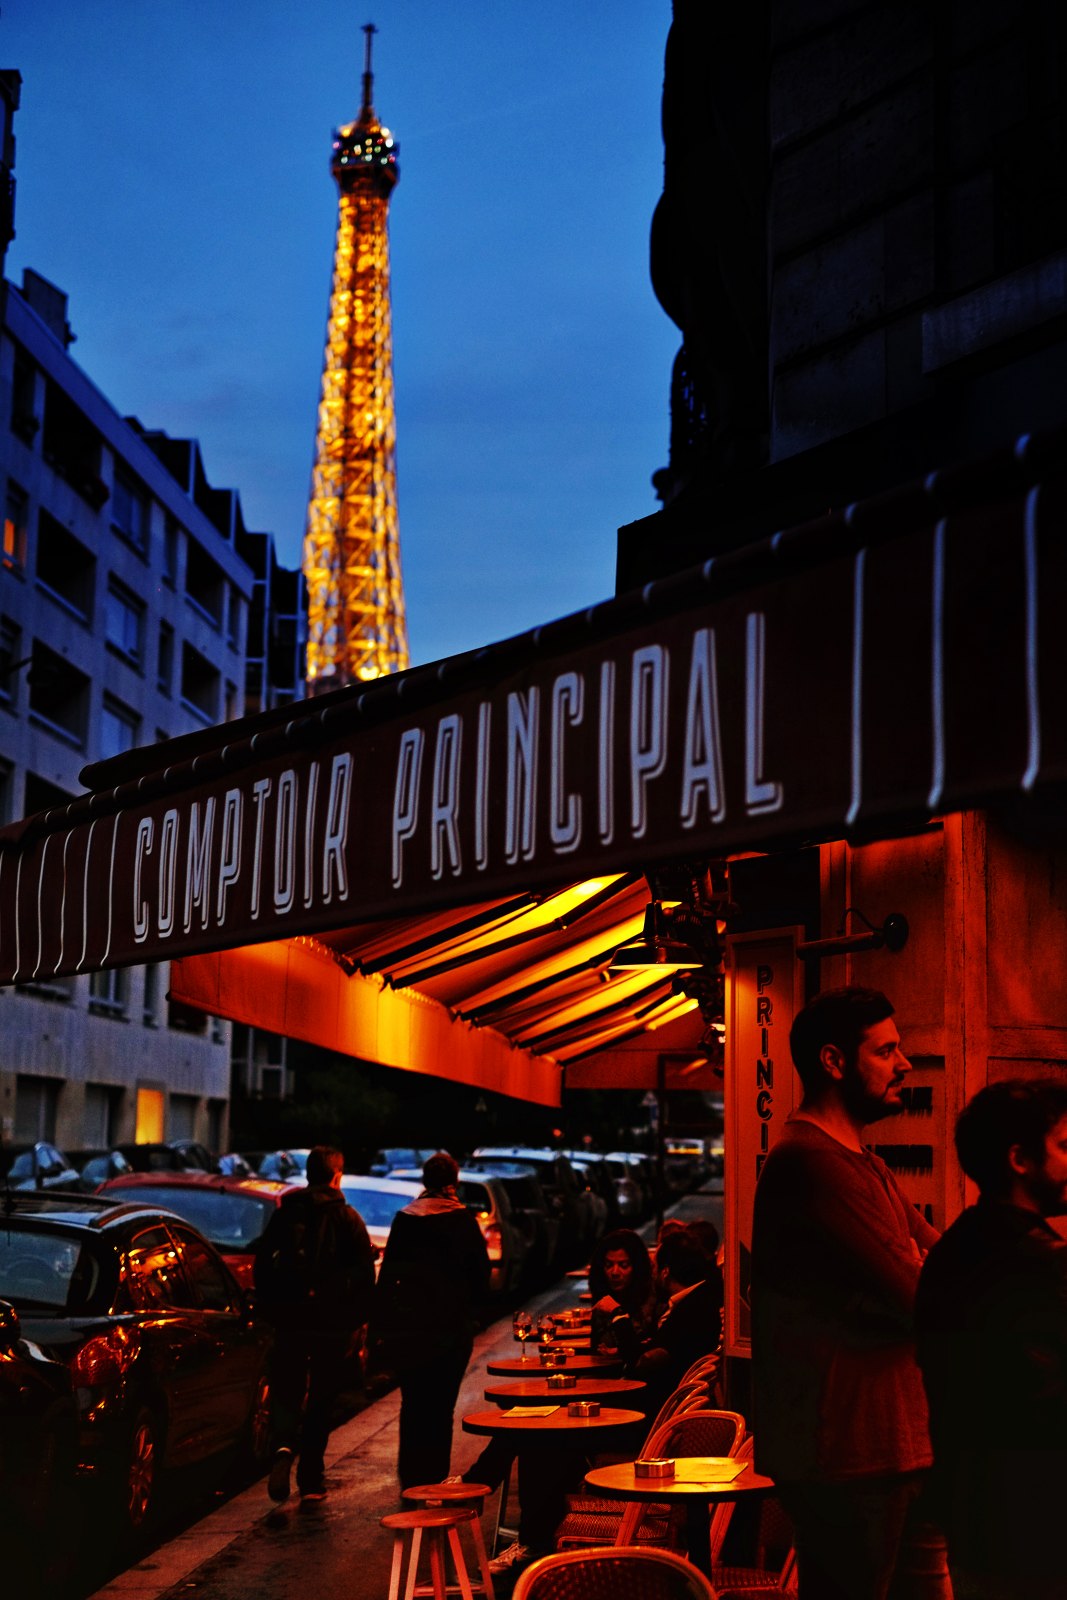 Evening at Comptoir Principal with a view of the Eiffel Tower - Grenelle, Paris, France. Photography by Kent Johnson